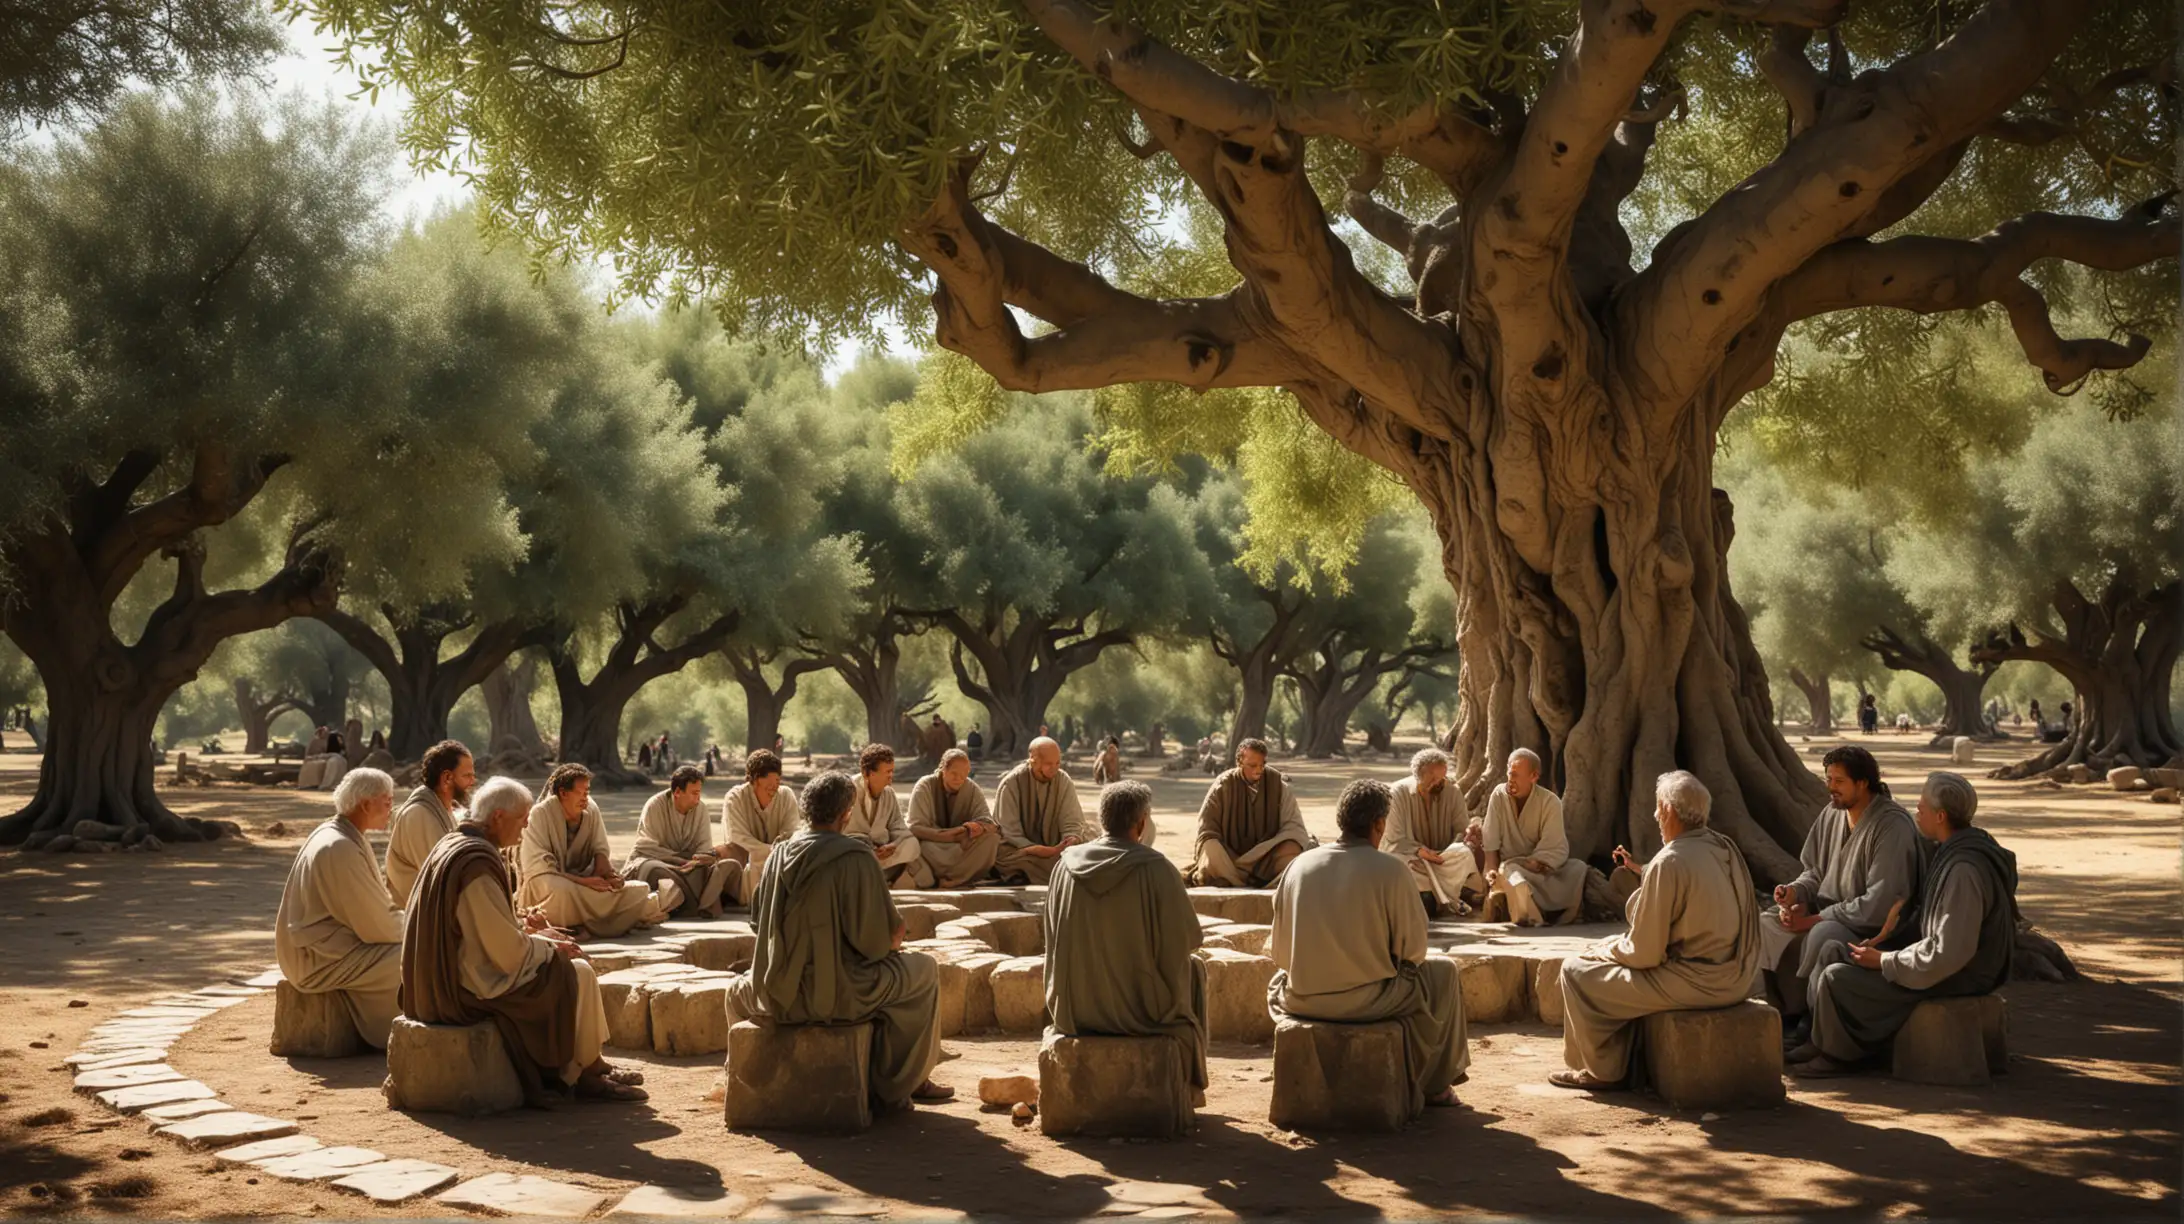 Stoic Philosophers Engaging in Thoughtful Discussion under Ancient Olive Tree